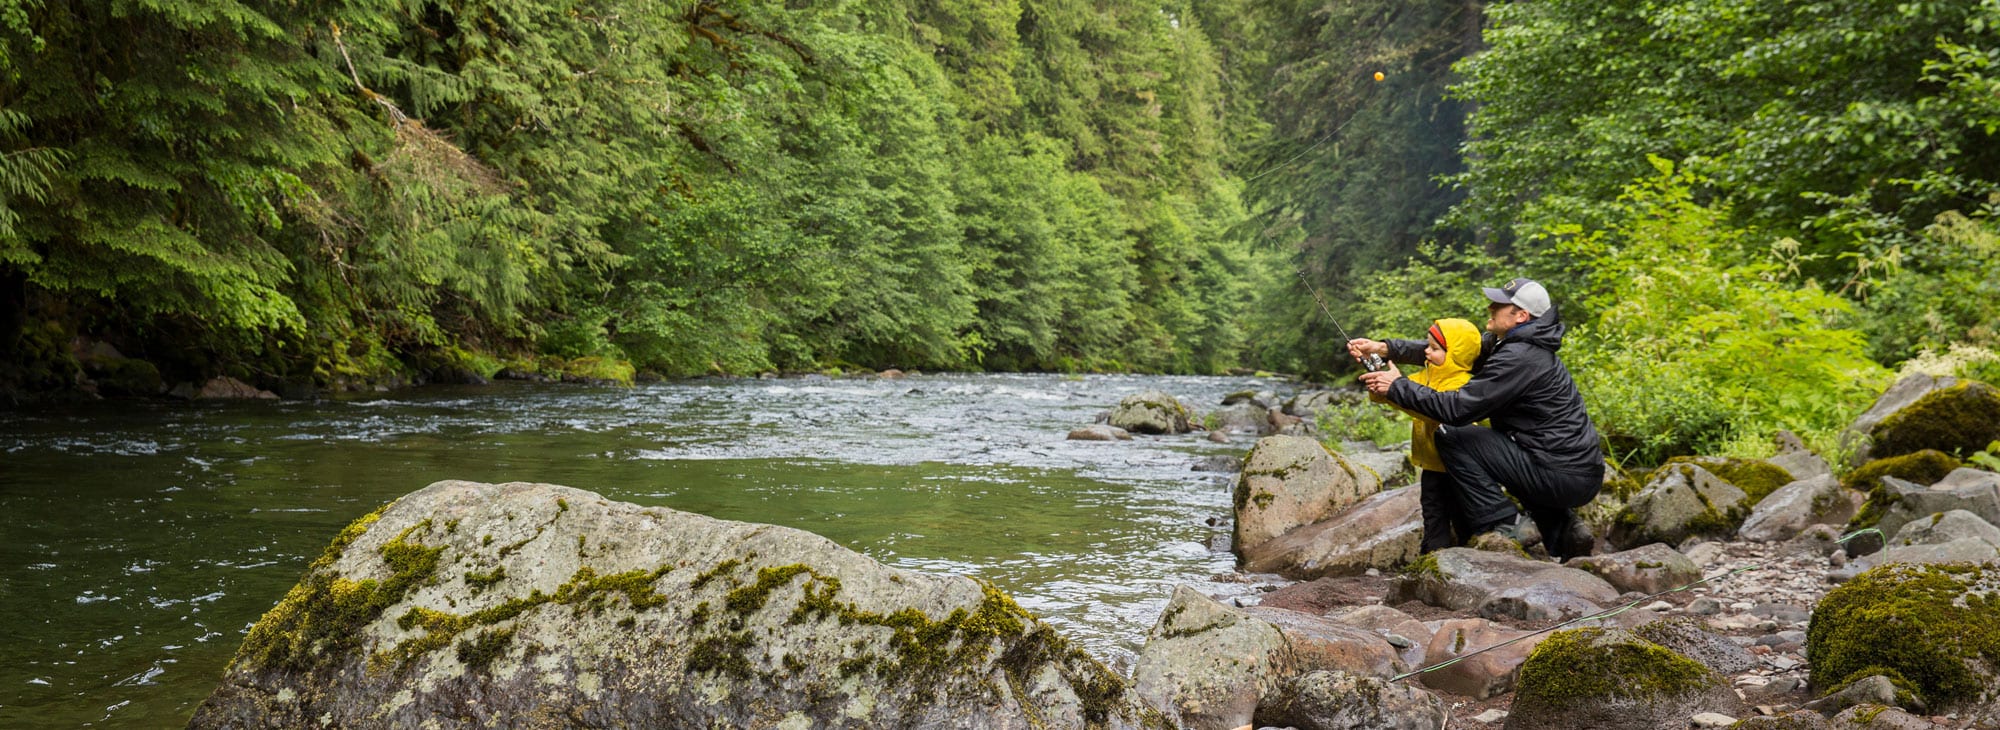 First-Timer’s Guide to Fishing in Oregon - Travel Oregon